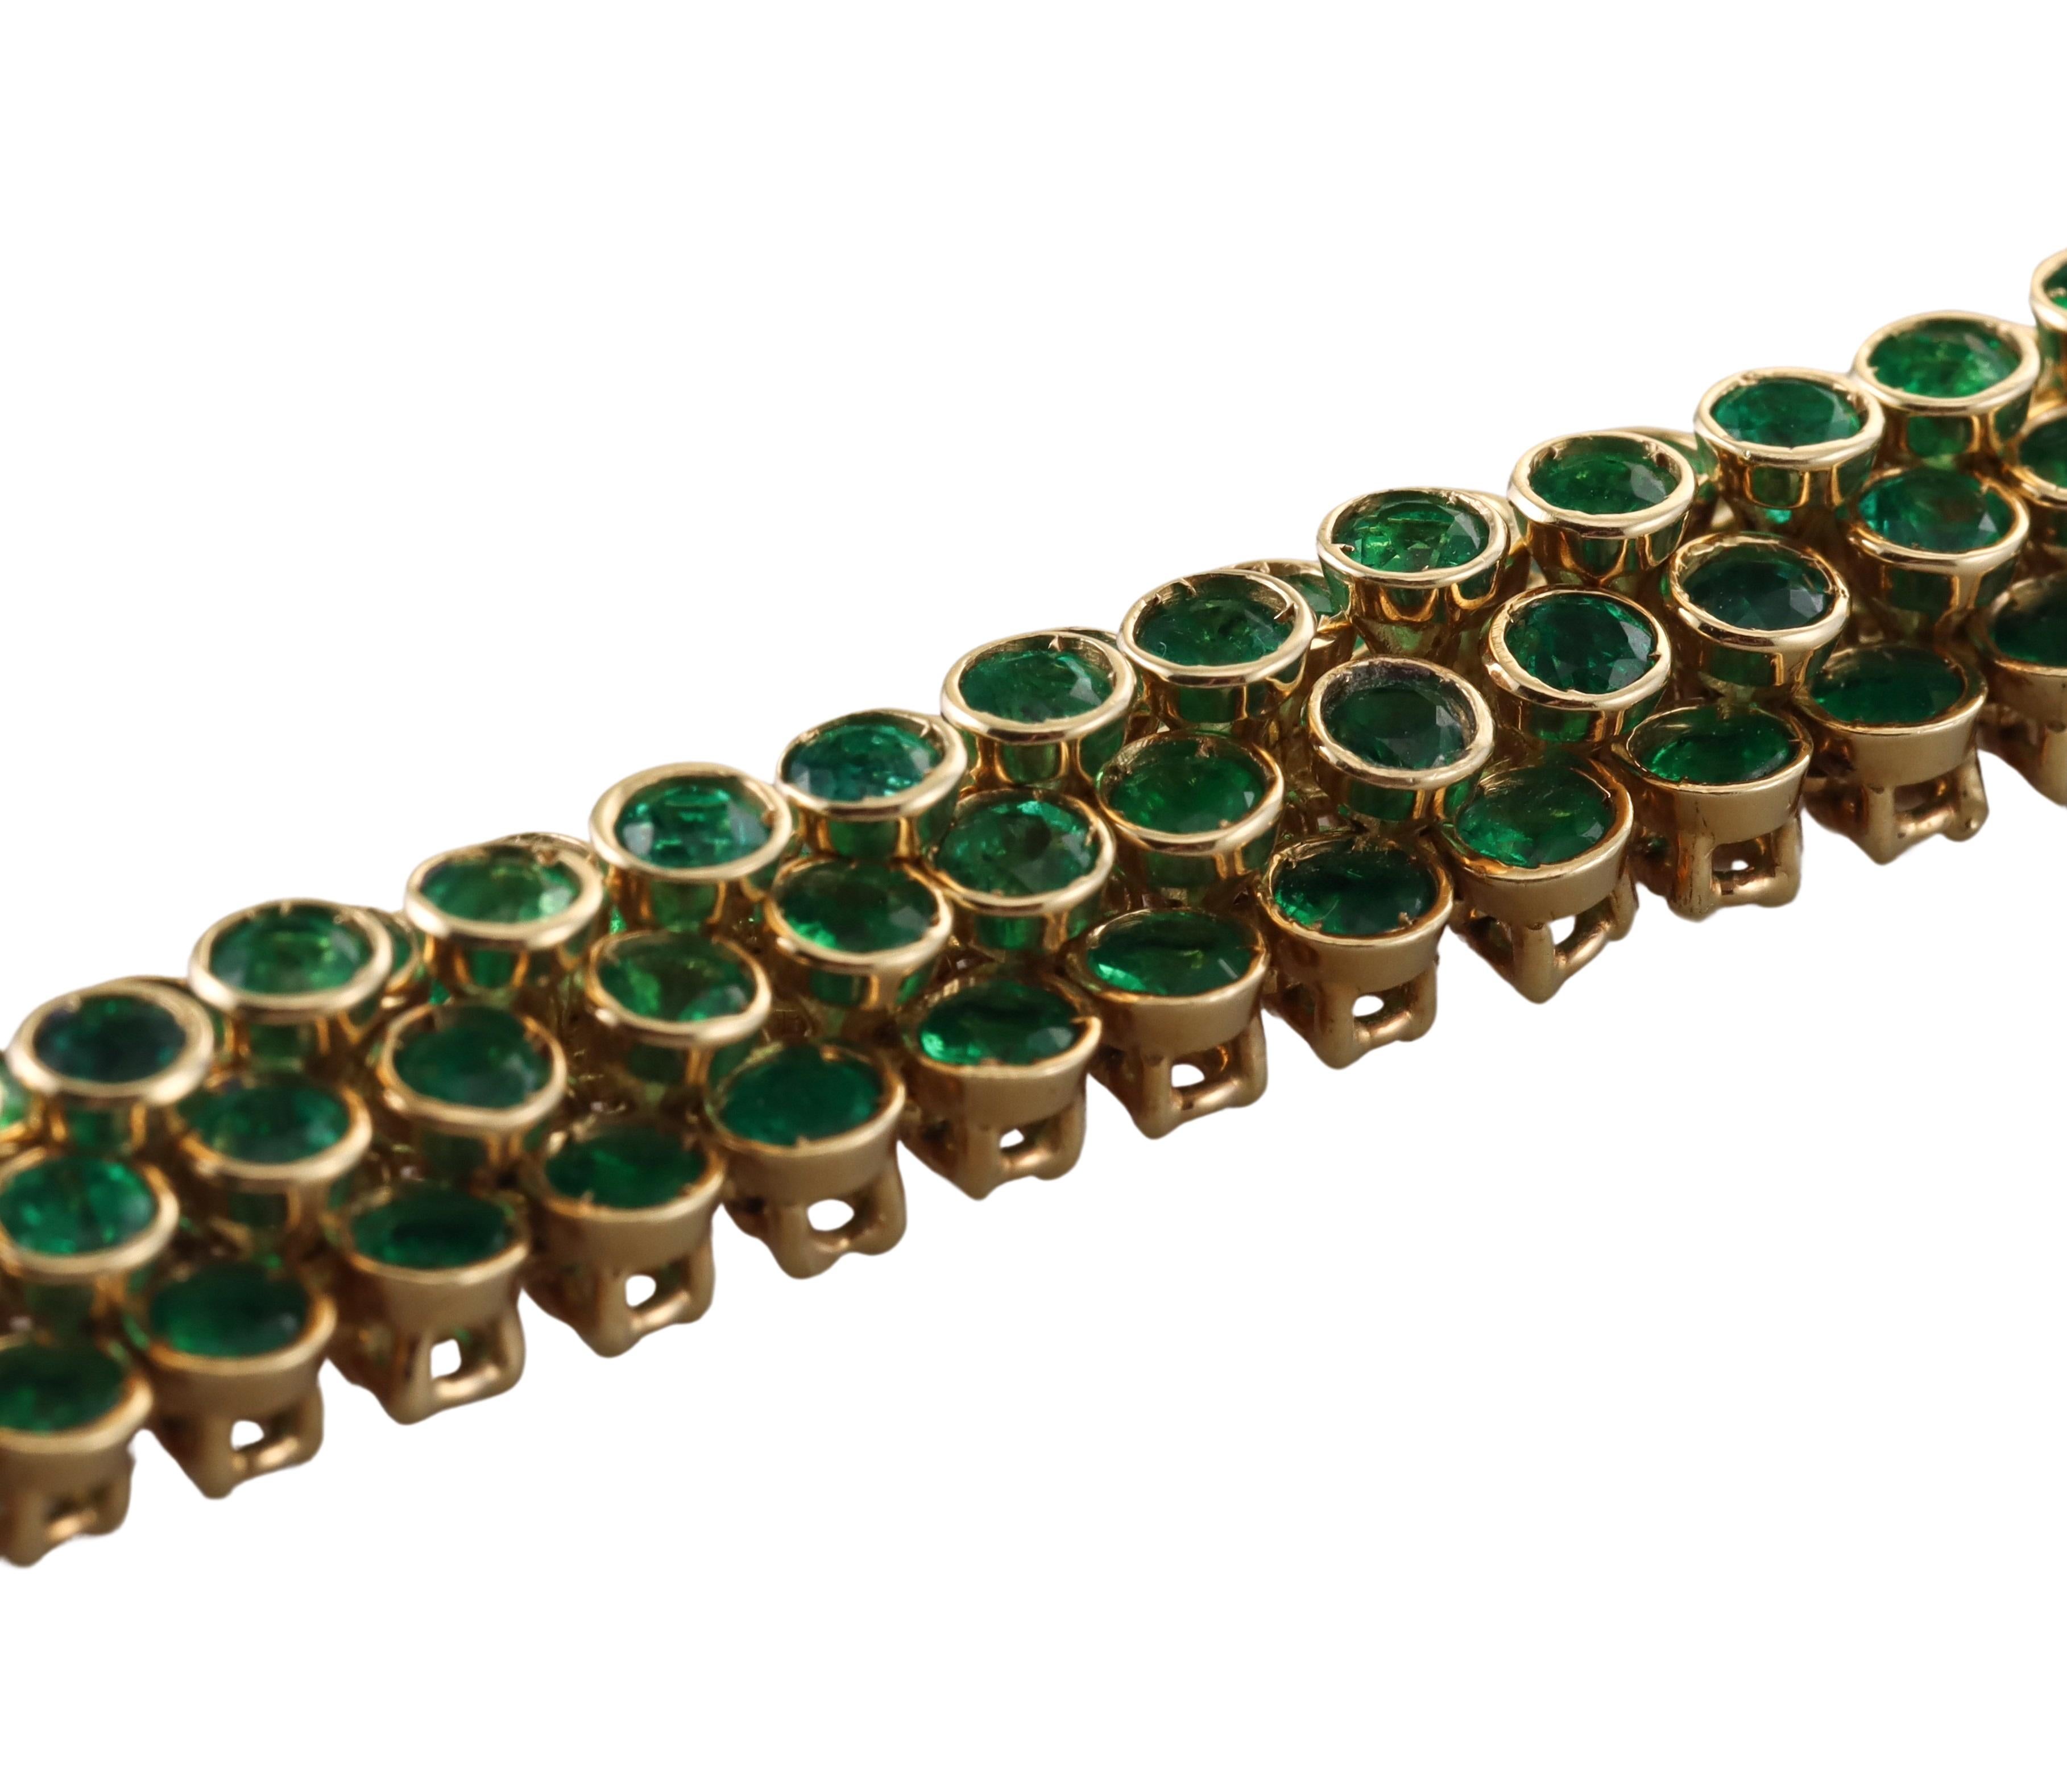 Hammerman Brothers Emerald Domed Gold Bracelet In Excellent Condition For Sale In New York, NY